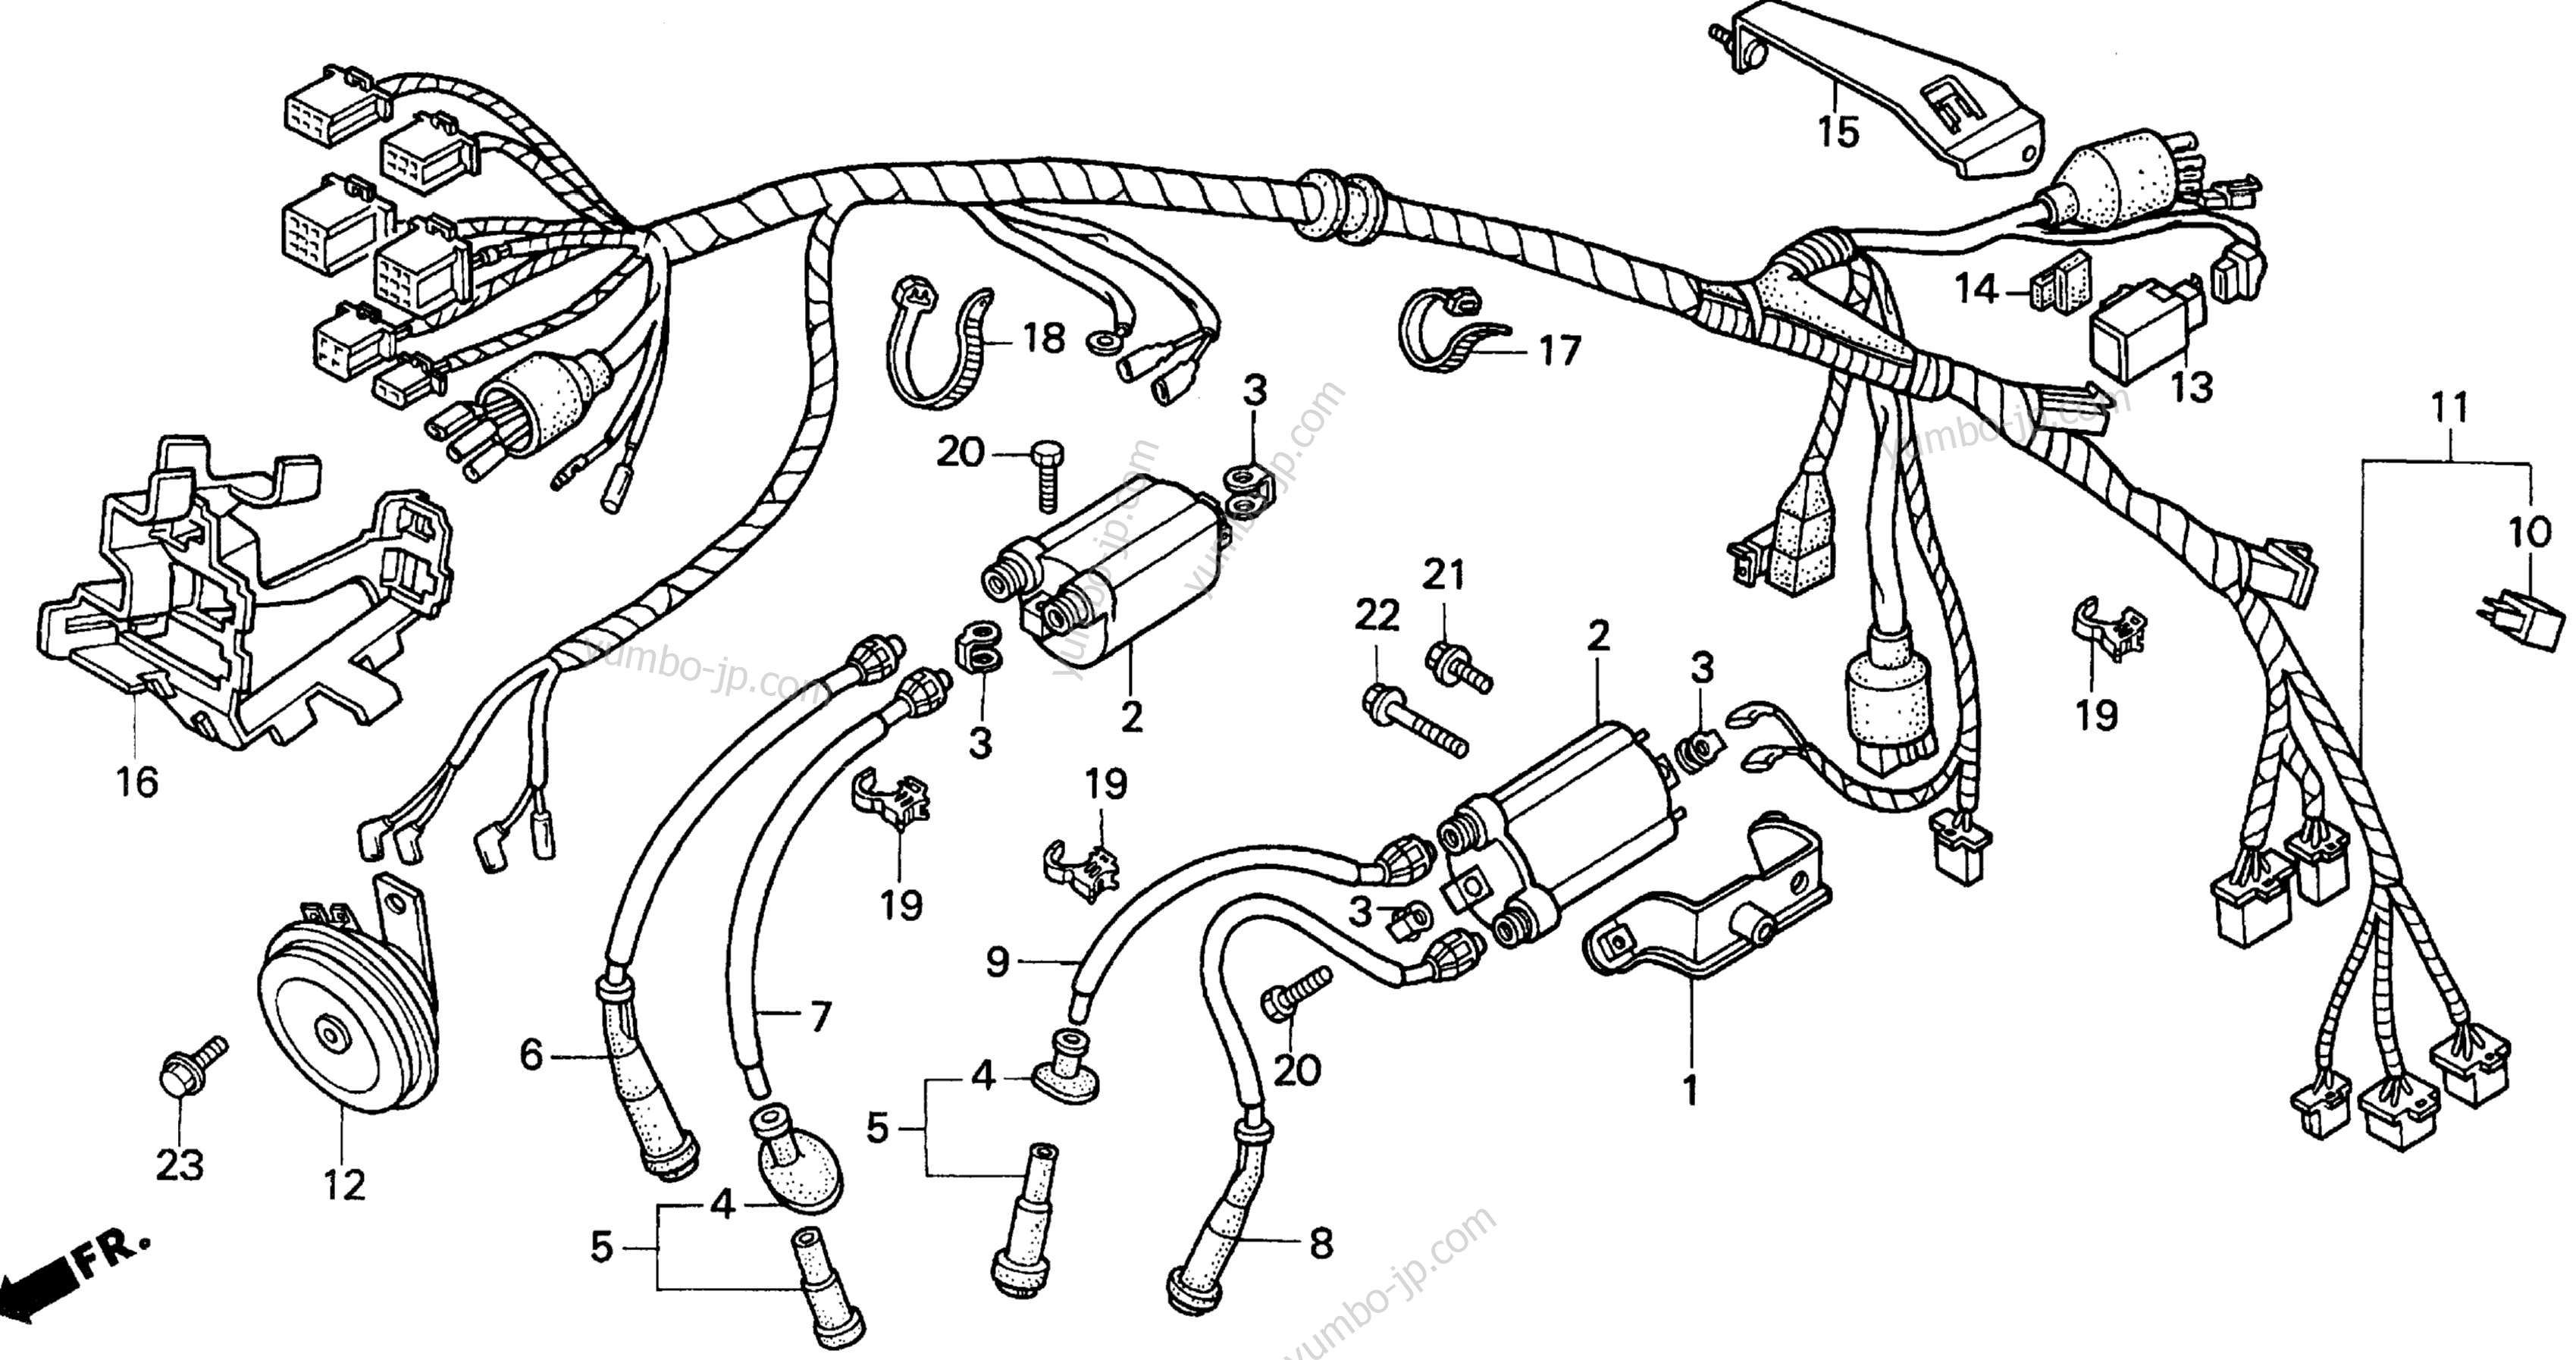 WIRE HARNESS for motorcycles HONDA VT600C A 2001 year